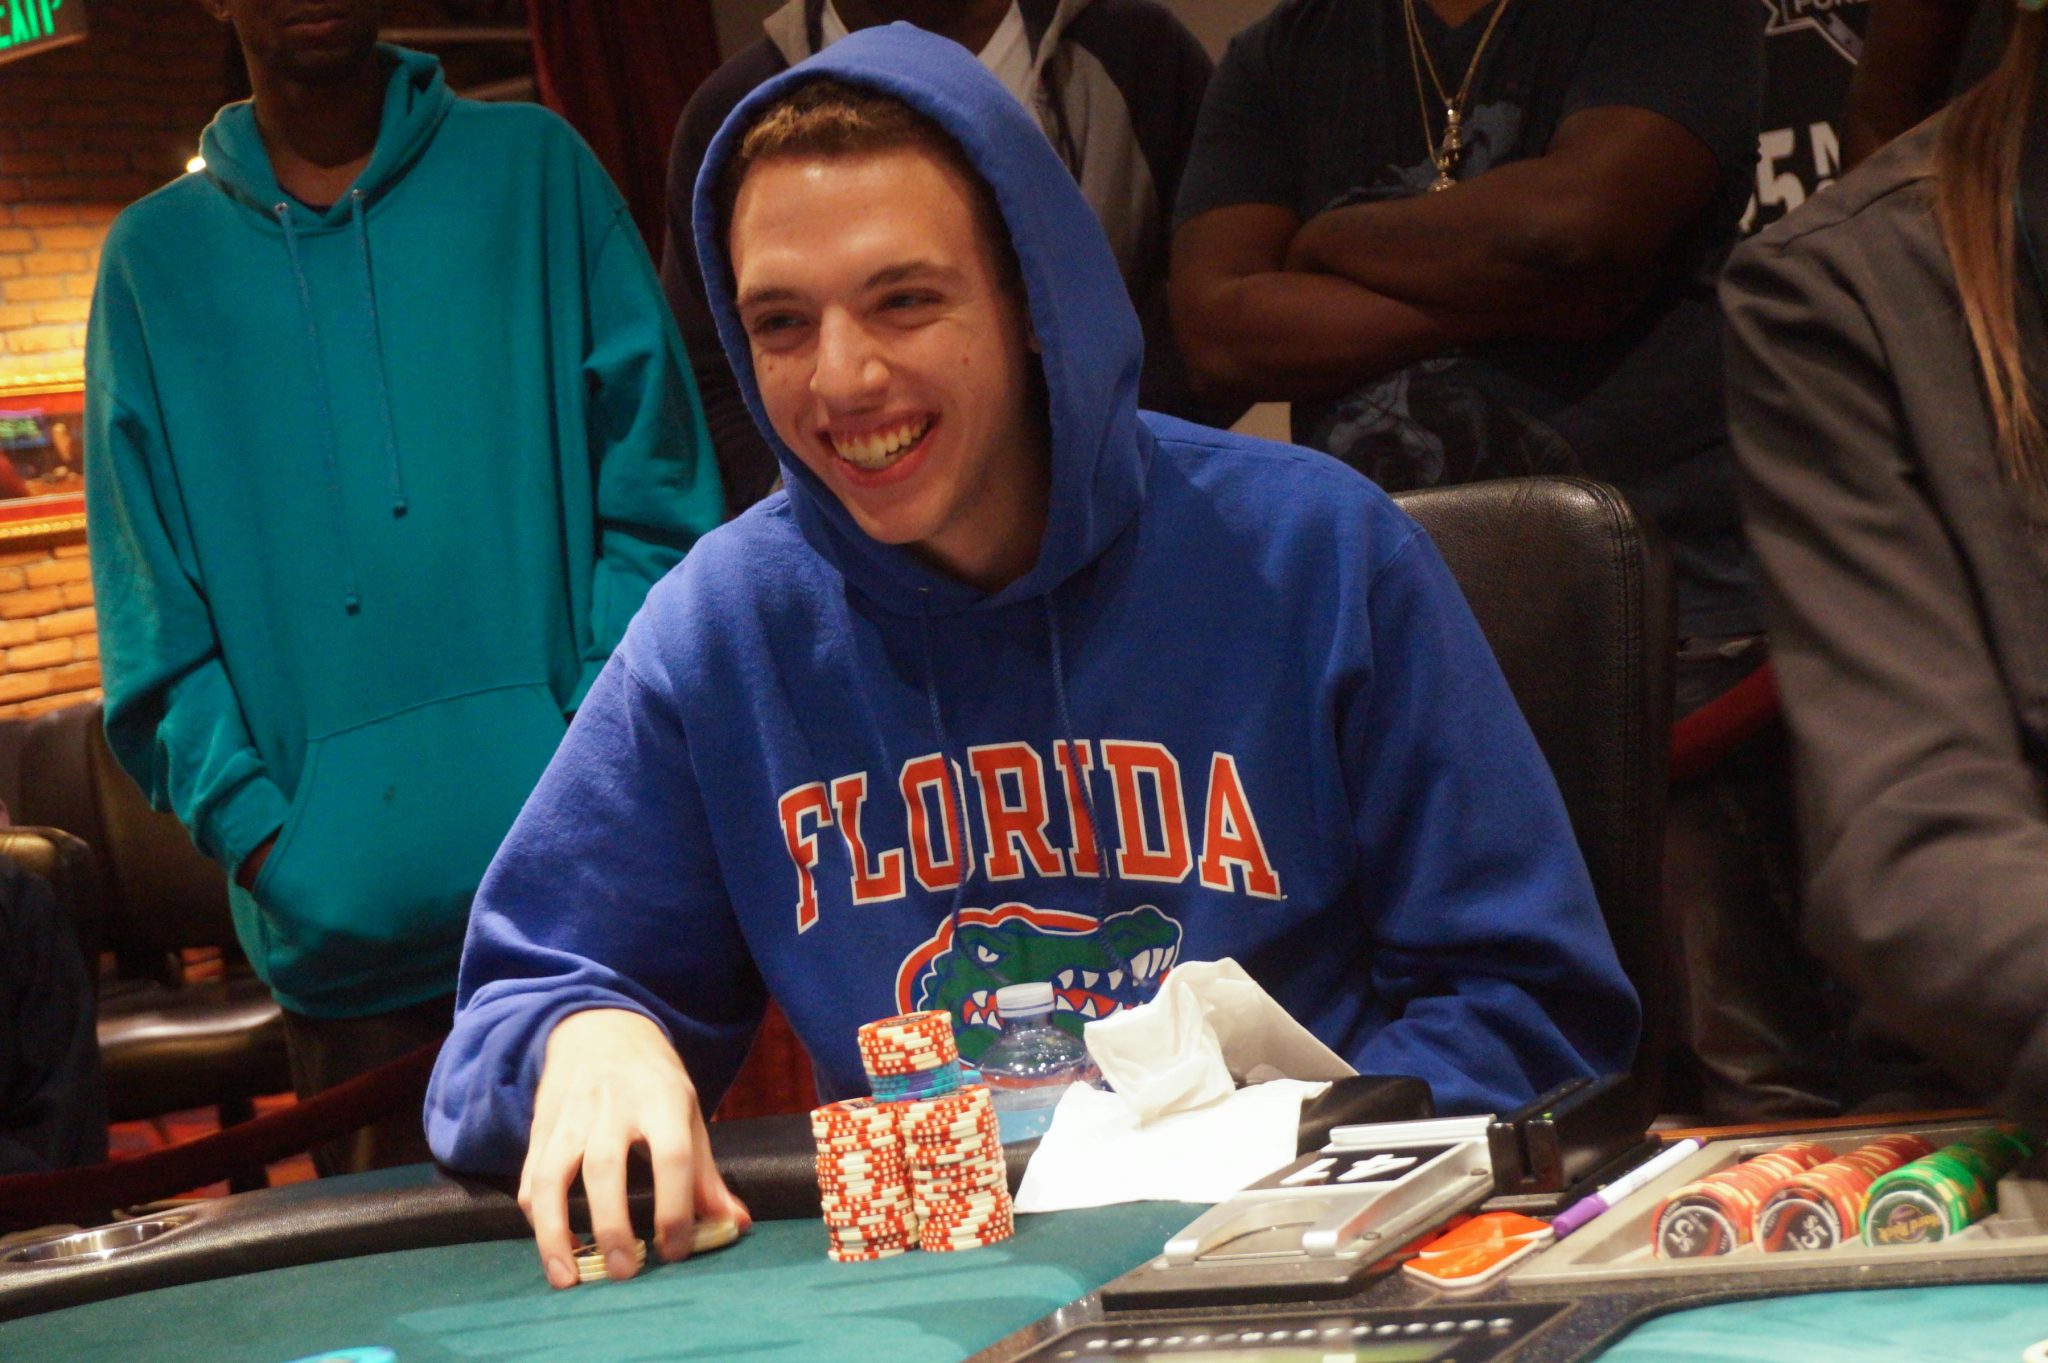 Jacob Snider, 4th place ($35,710)